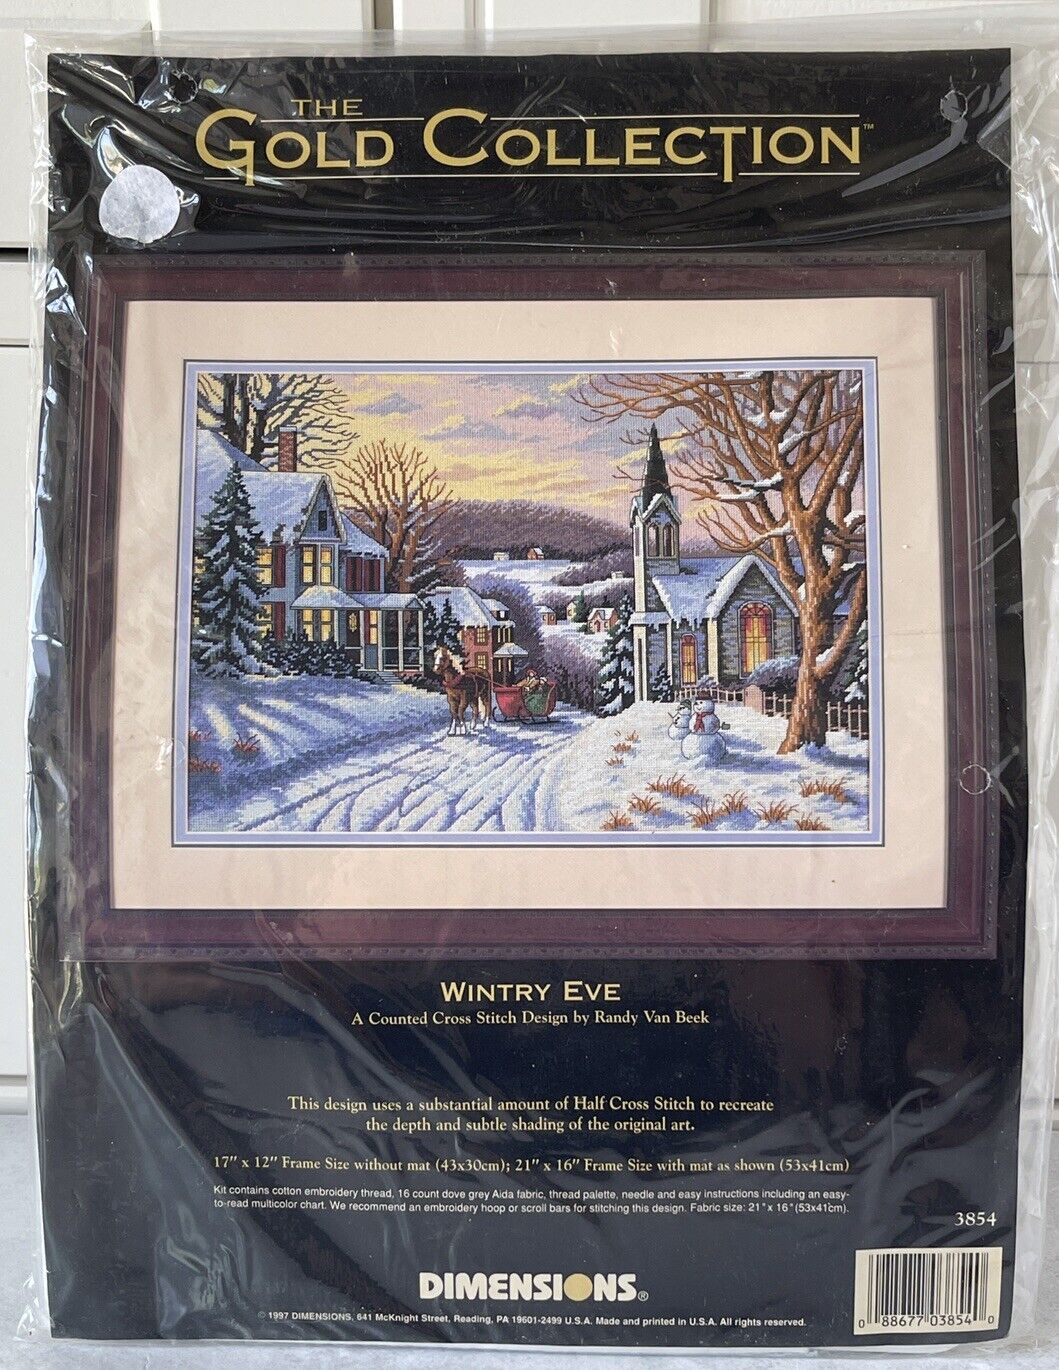 Wintry Eve - Dimensions Gold Collection Cross Stitch KIT - SEALED 1997 #3854